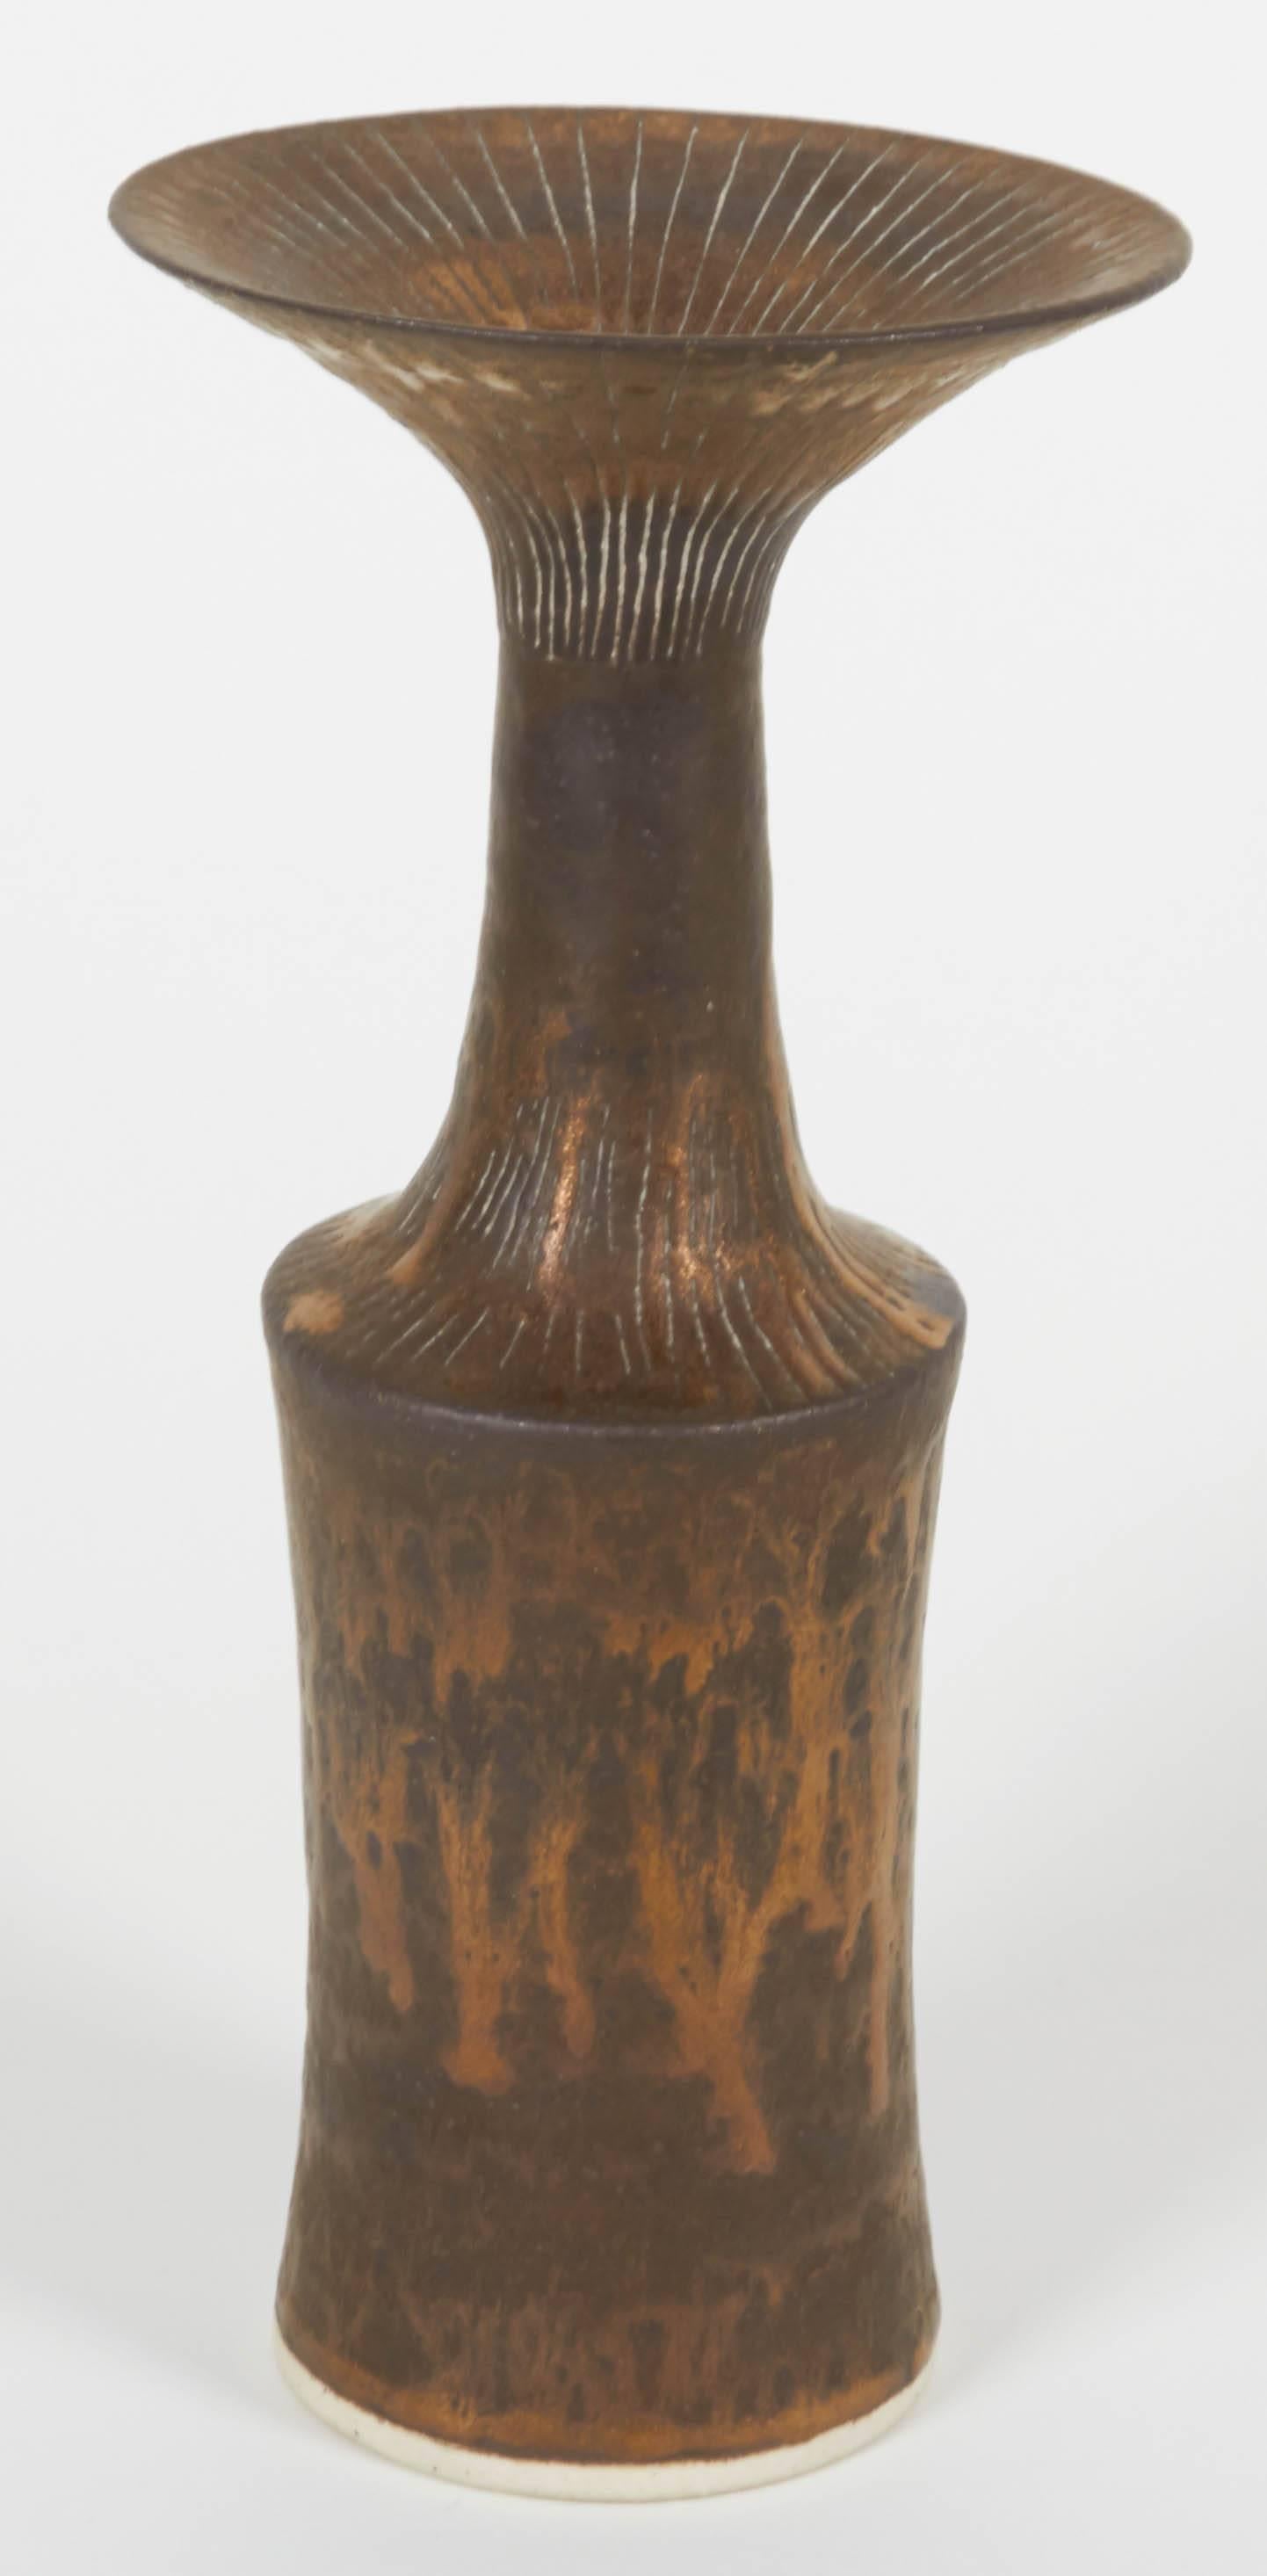 A sculptural flared rim stoneware vase by sculpture/ artist Dame Lucie Rie. The flared earthy bronze rim with intermittent Sgraffito along the neck to shoulder expresses deeply the technical and creative savoir faire of Lucie Rie.

